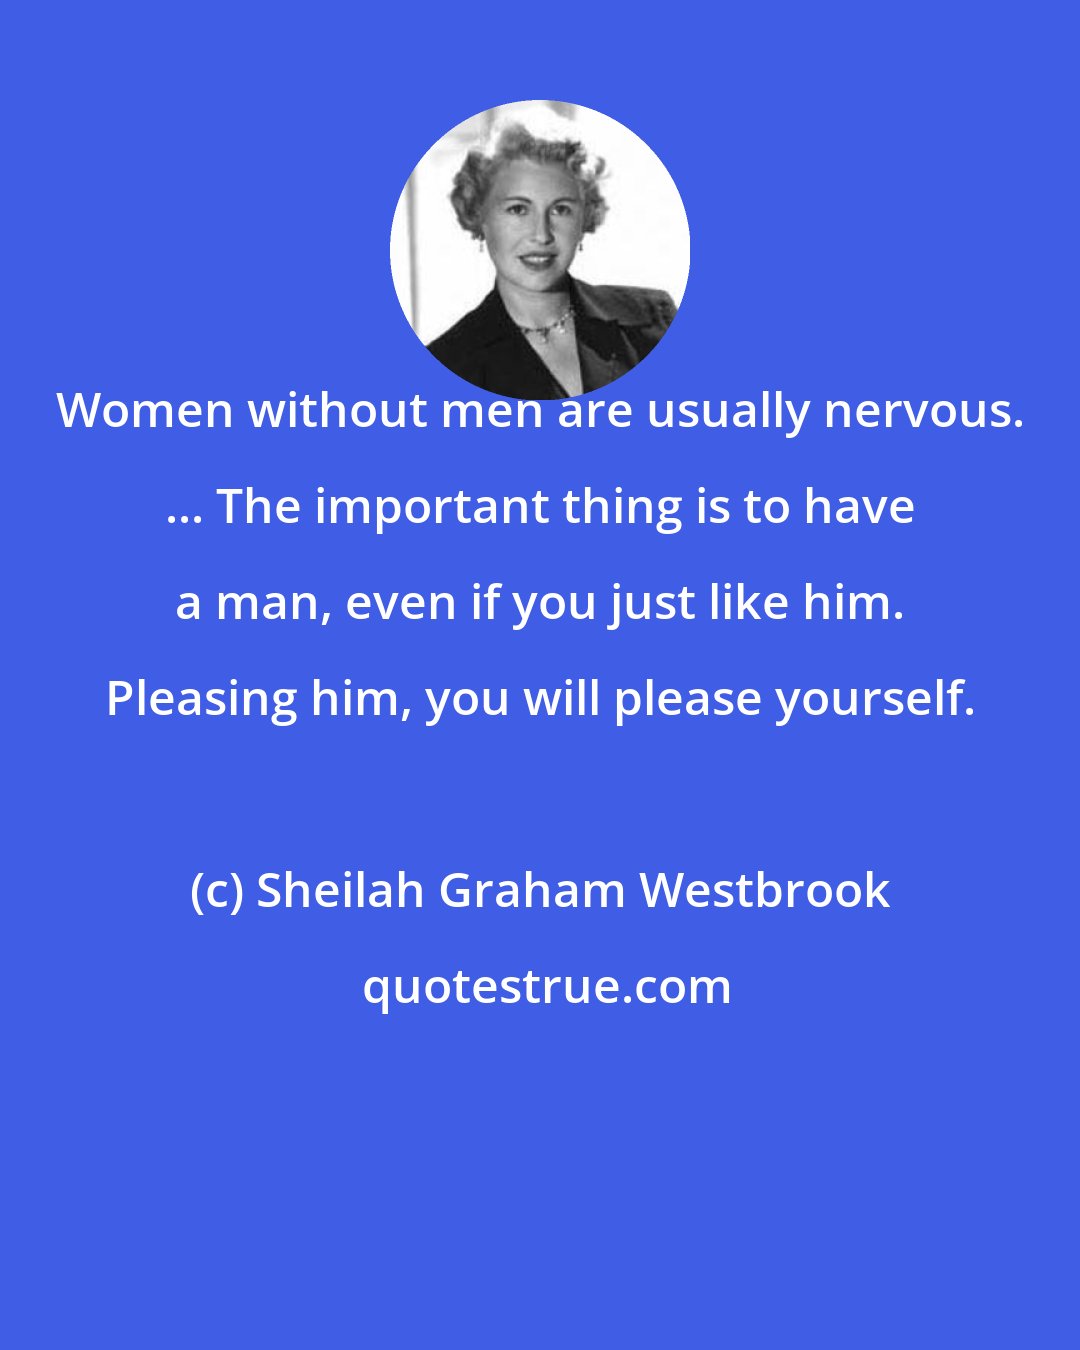 Sheilah Graham Westbrook: Women without men are usually nervous. ... The important thing is to have a man, even if you just like him. Pleasing him, you will please yourself.